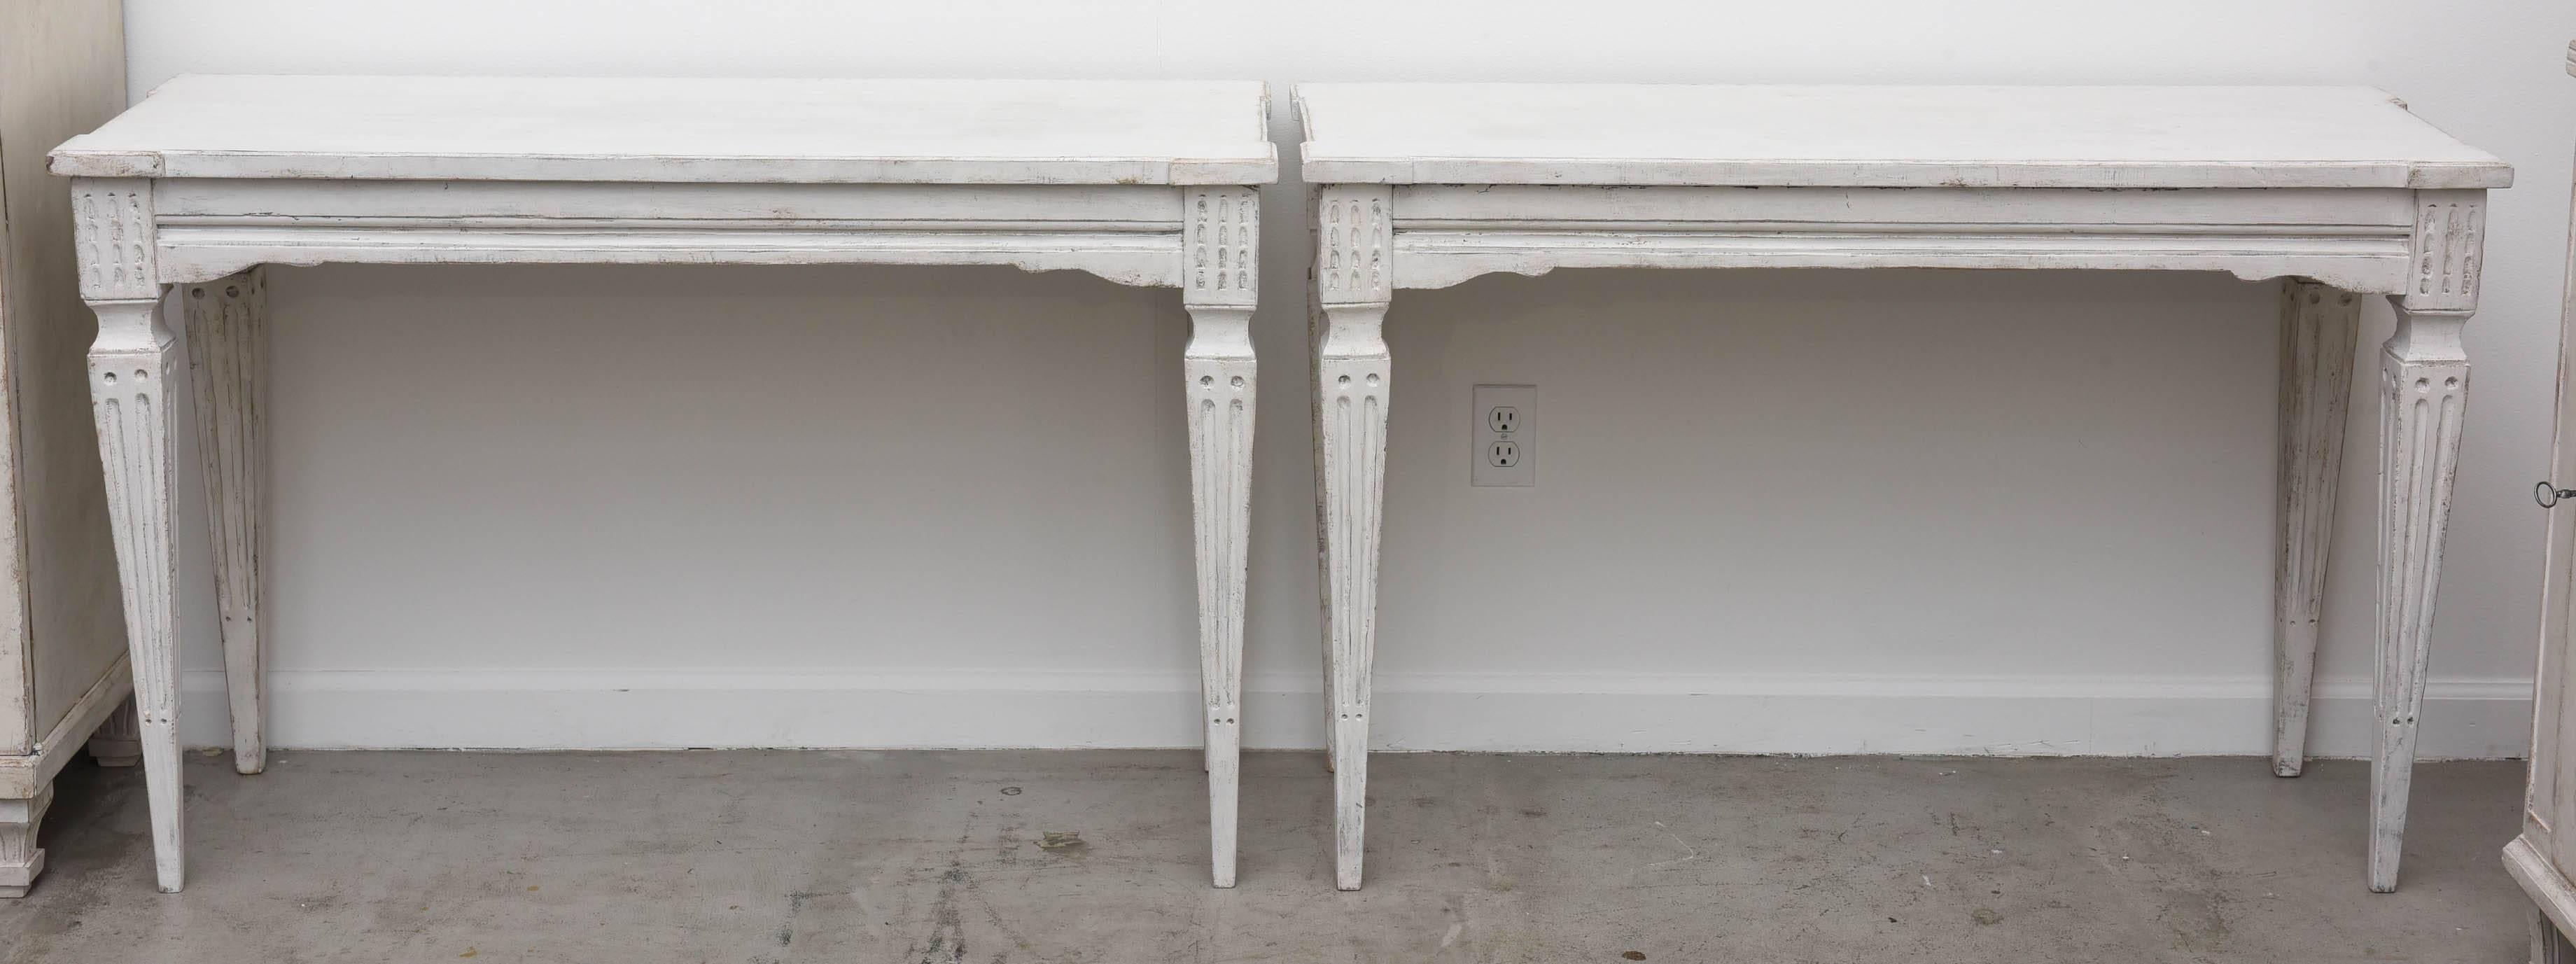 Pair of antique Swedish console tables. Classic Scandinavian design, simple carvings on the corners, square tapered and fluted legs. Gustation grayish white
distressed finish.  There are Swedish blue highlights in the carved detailed area.

Circa